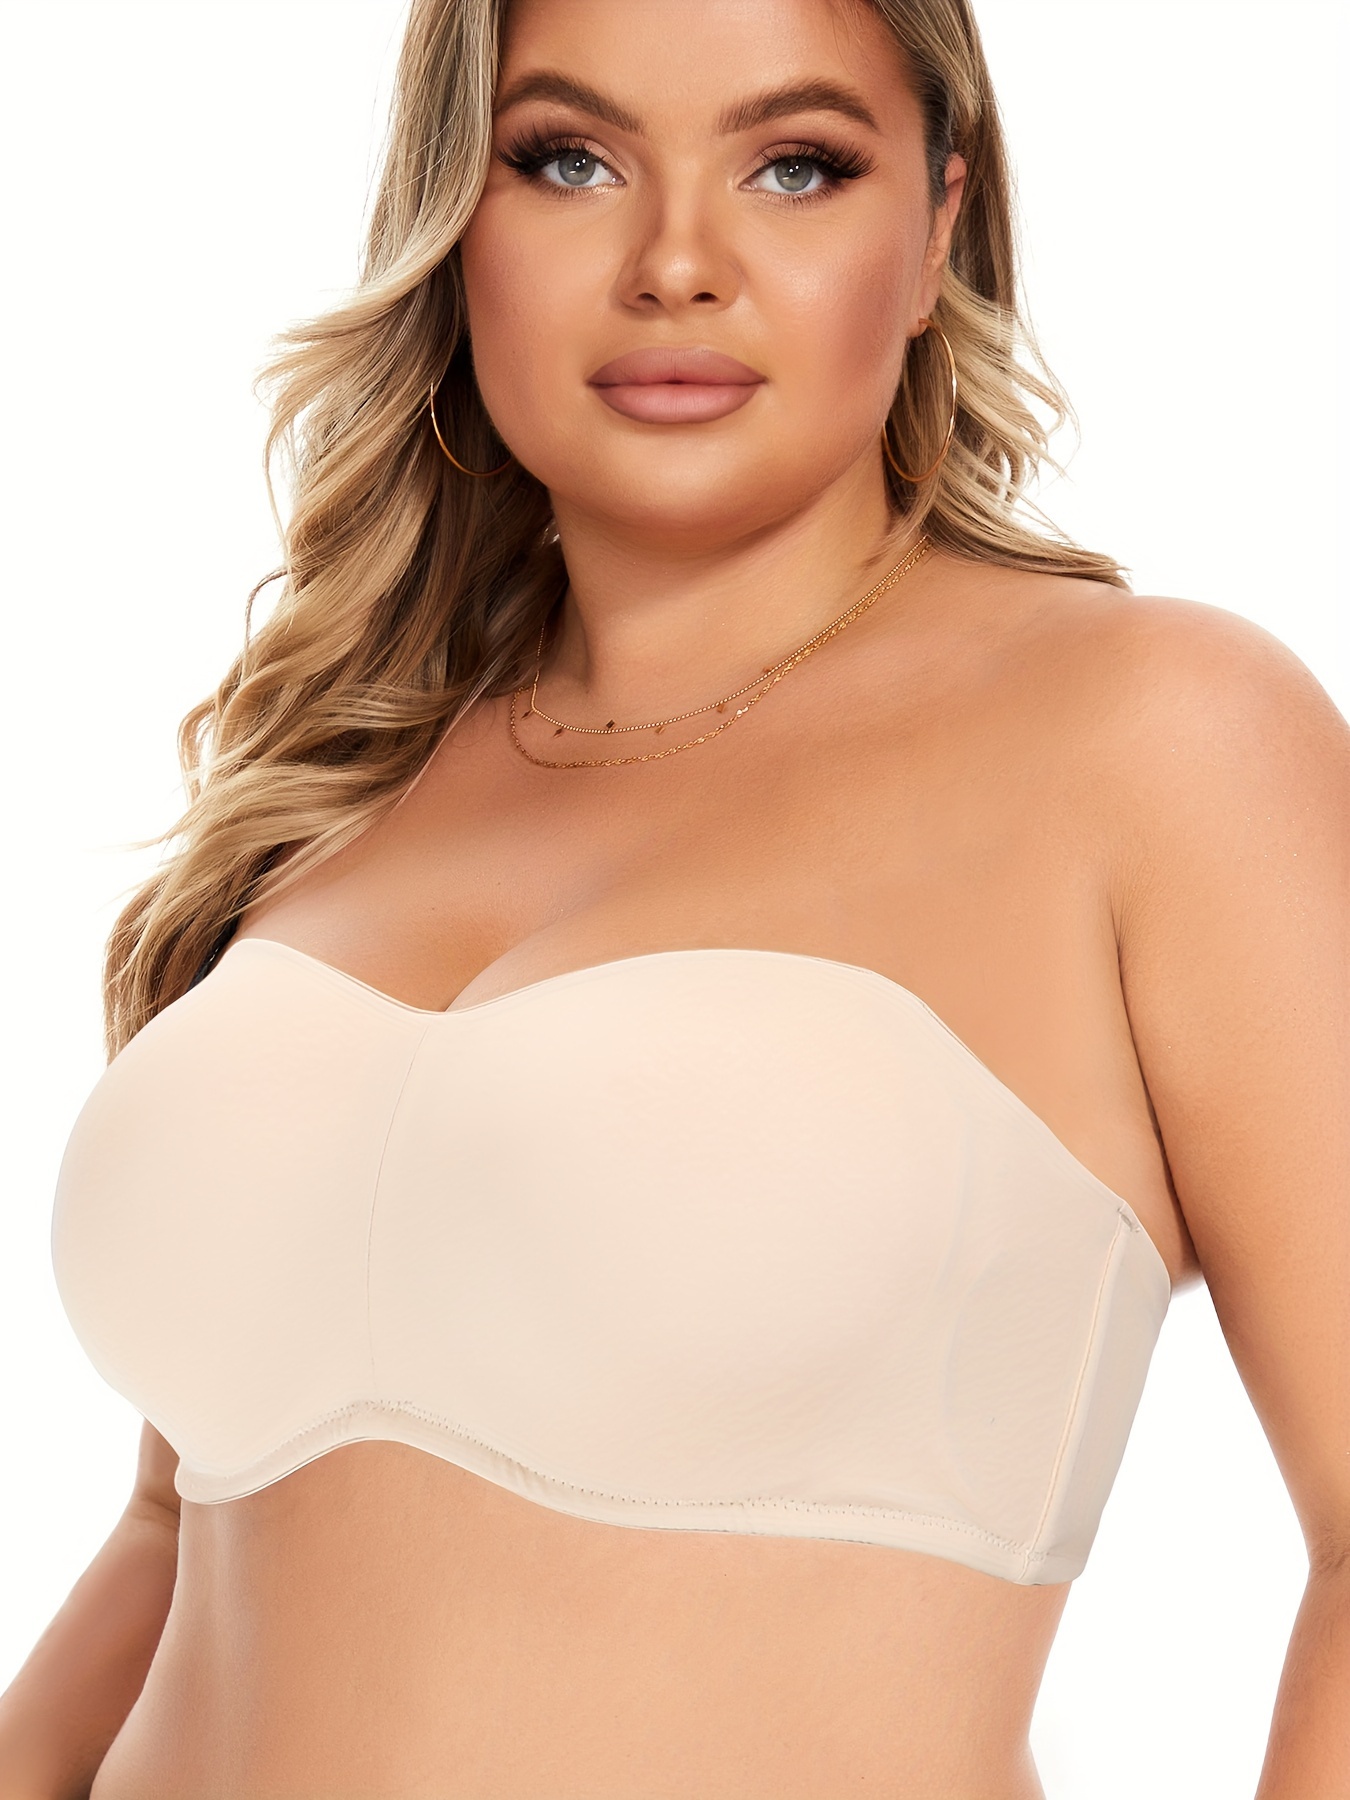 Strapless Bras for Bigger Bust,Strapless Bras for Large Breasts Strapless  Bra G Cup Women Strapless Bra Size Plus Removable Padded Top Stretchy Bra  Strapless Double Bandeau Soft Bralette Underwear W : 